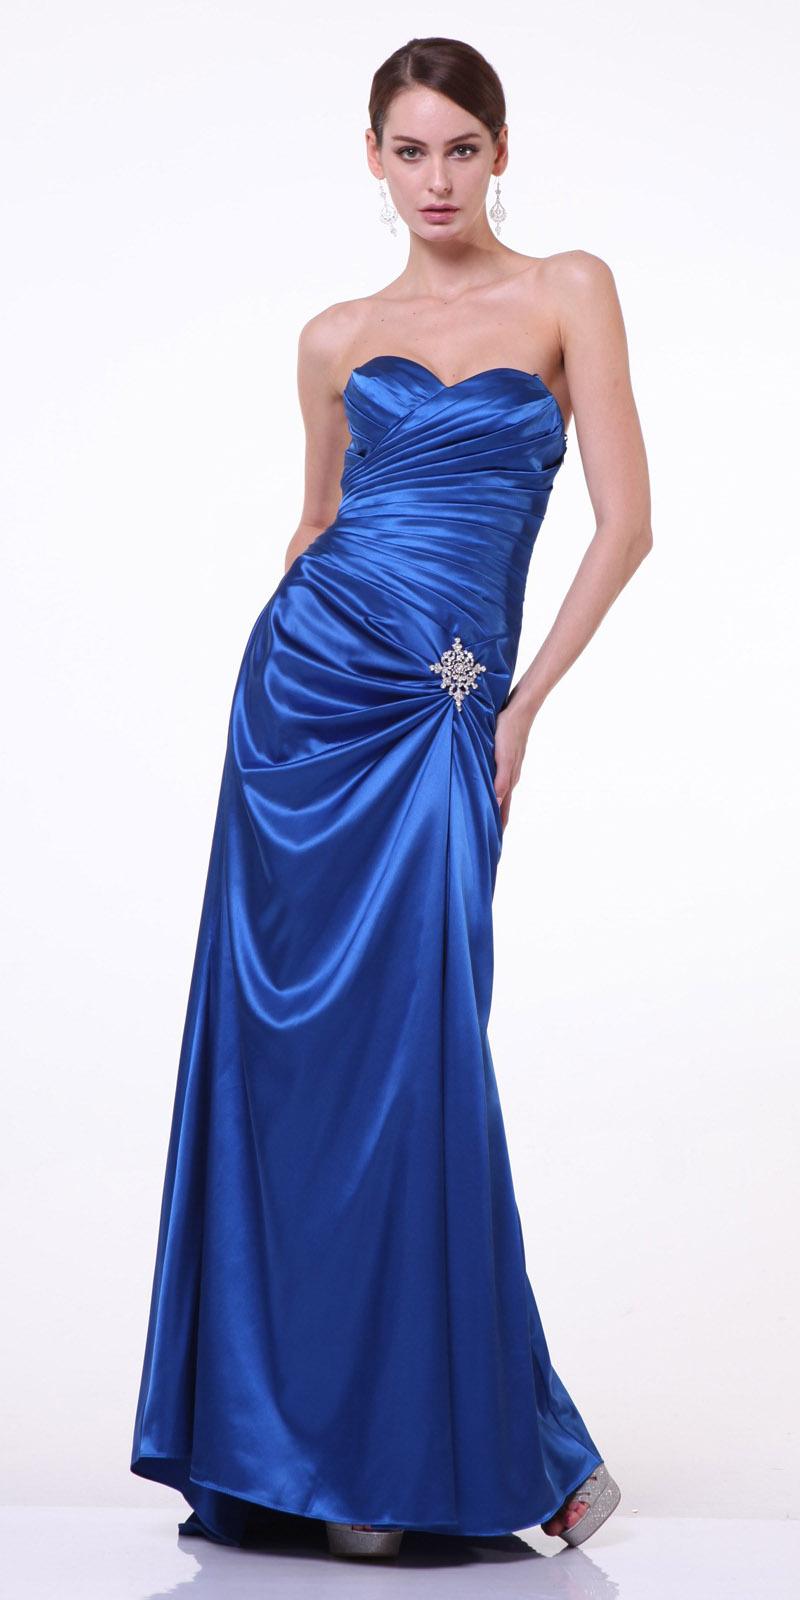 Silver Satin Prom Dress Pleated Bodice Strapless Sweetheart Neck ...